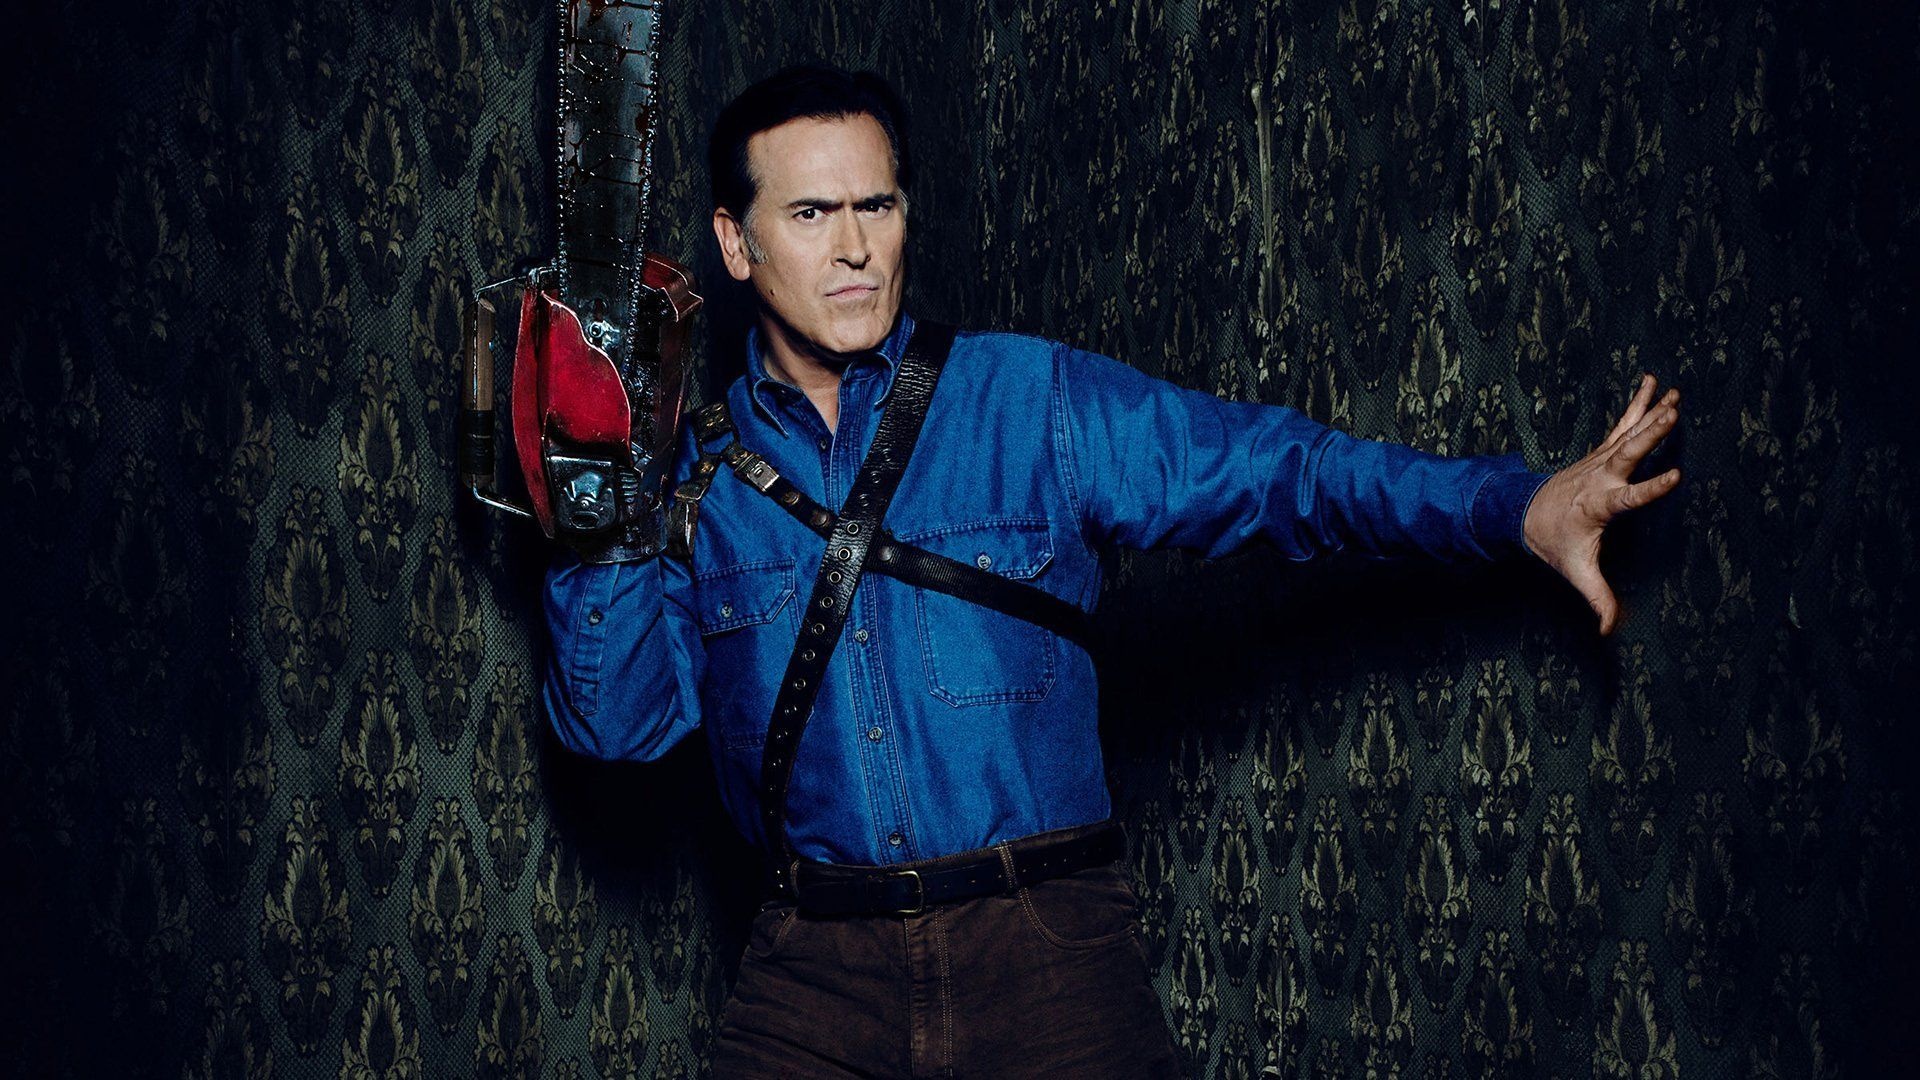 Bruce Campbell: Ash Williams, The main character and the anti-hero in the Evil Dead franchise. 1920x1080 Full HD Wallpaper.